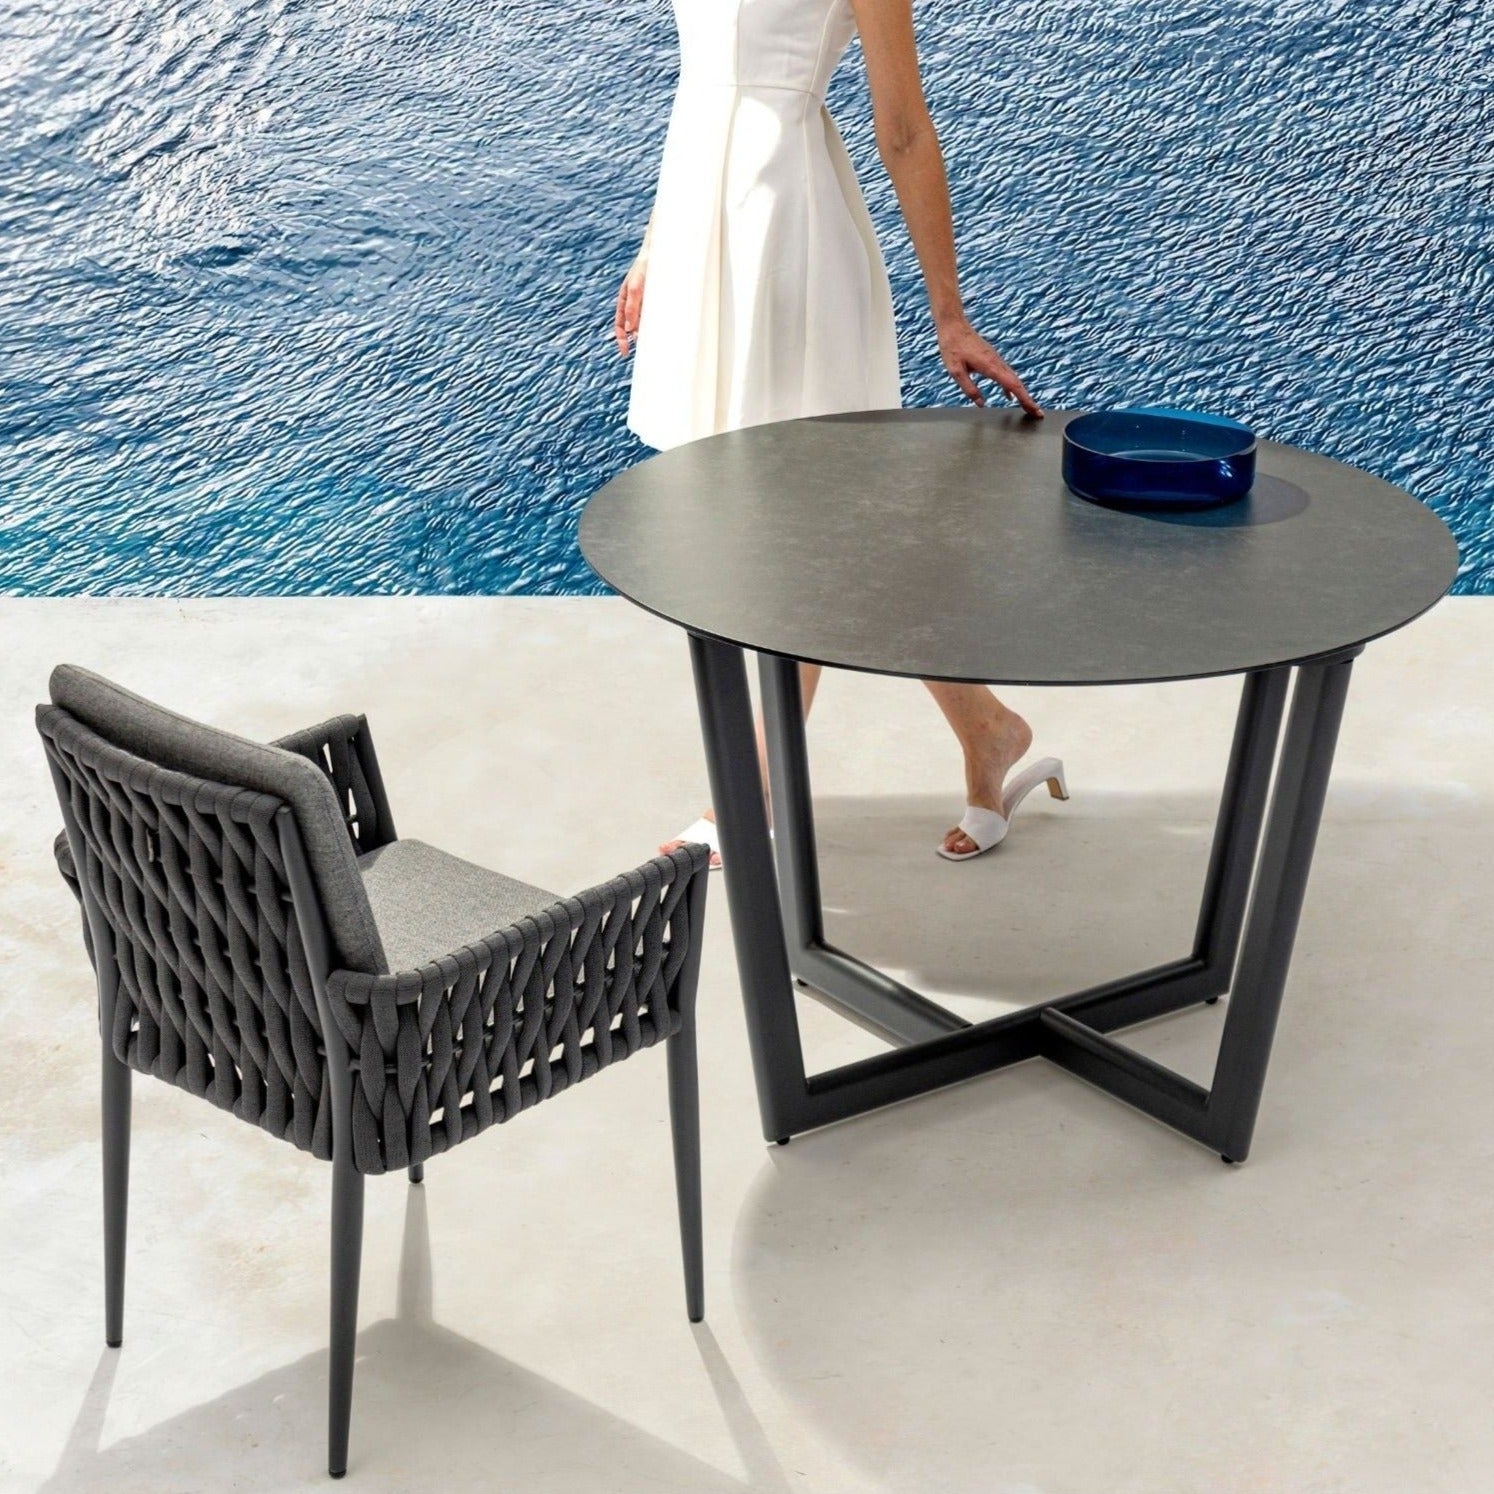 Hug Series | Outdoor Dining Chair